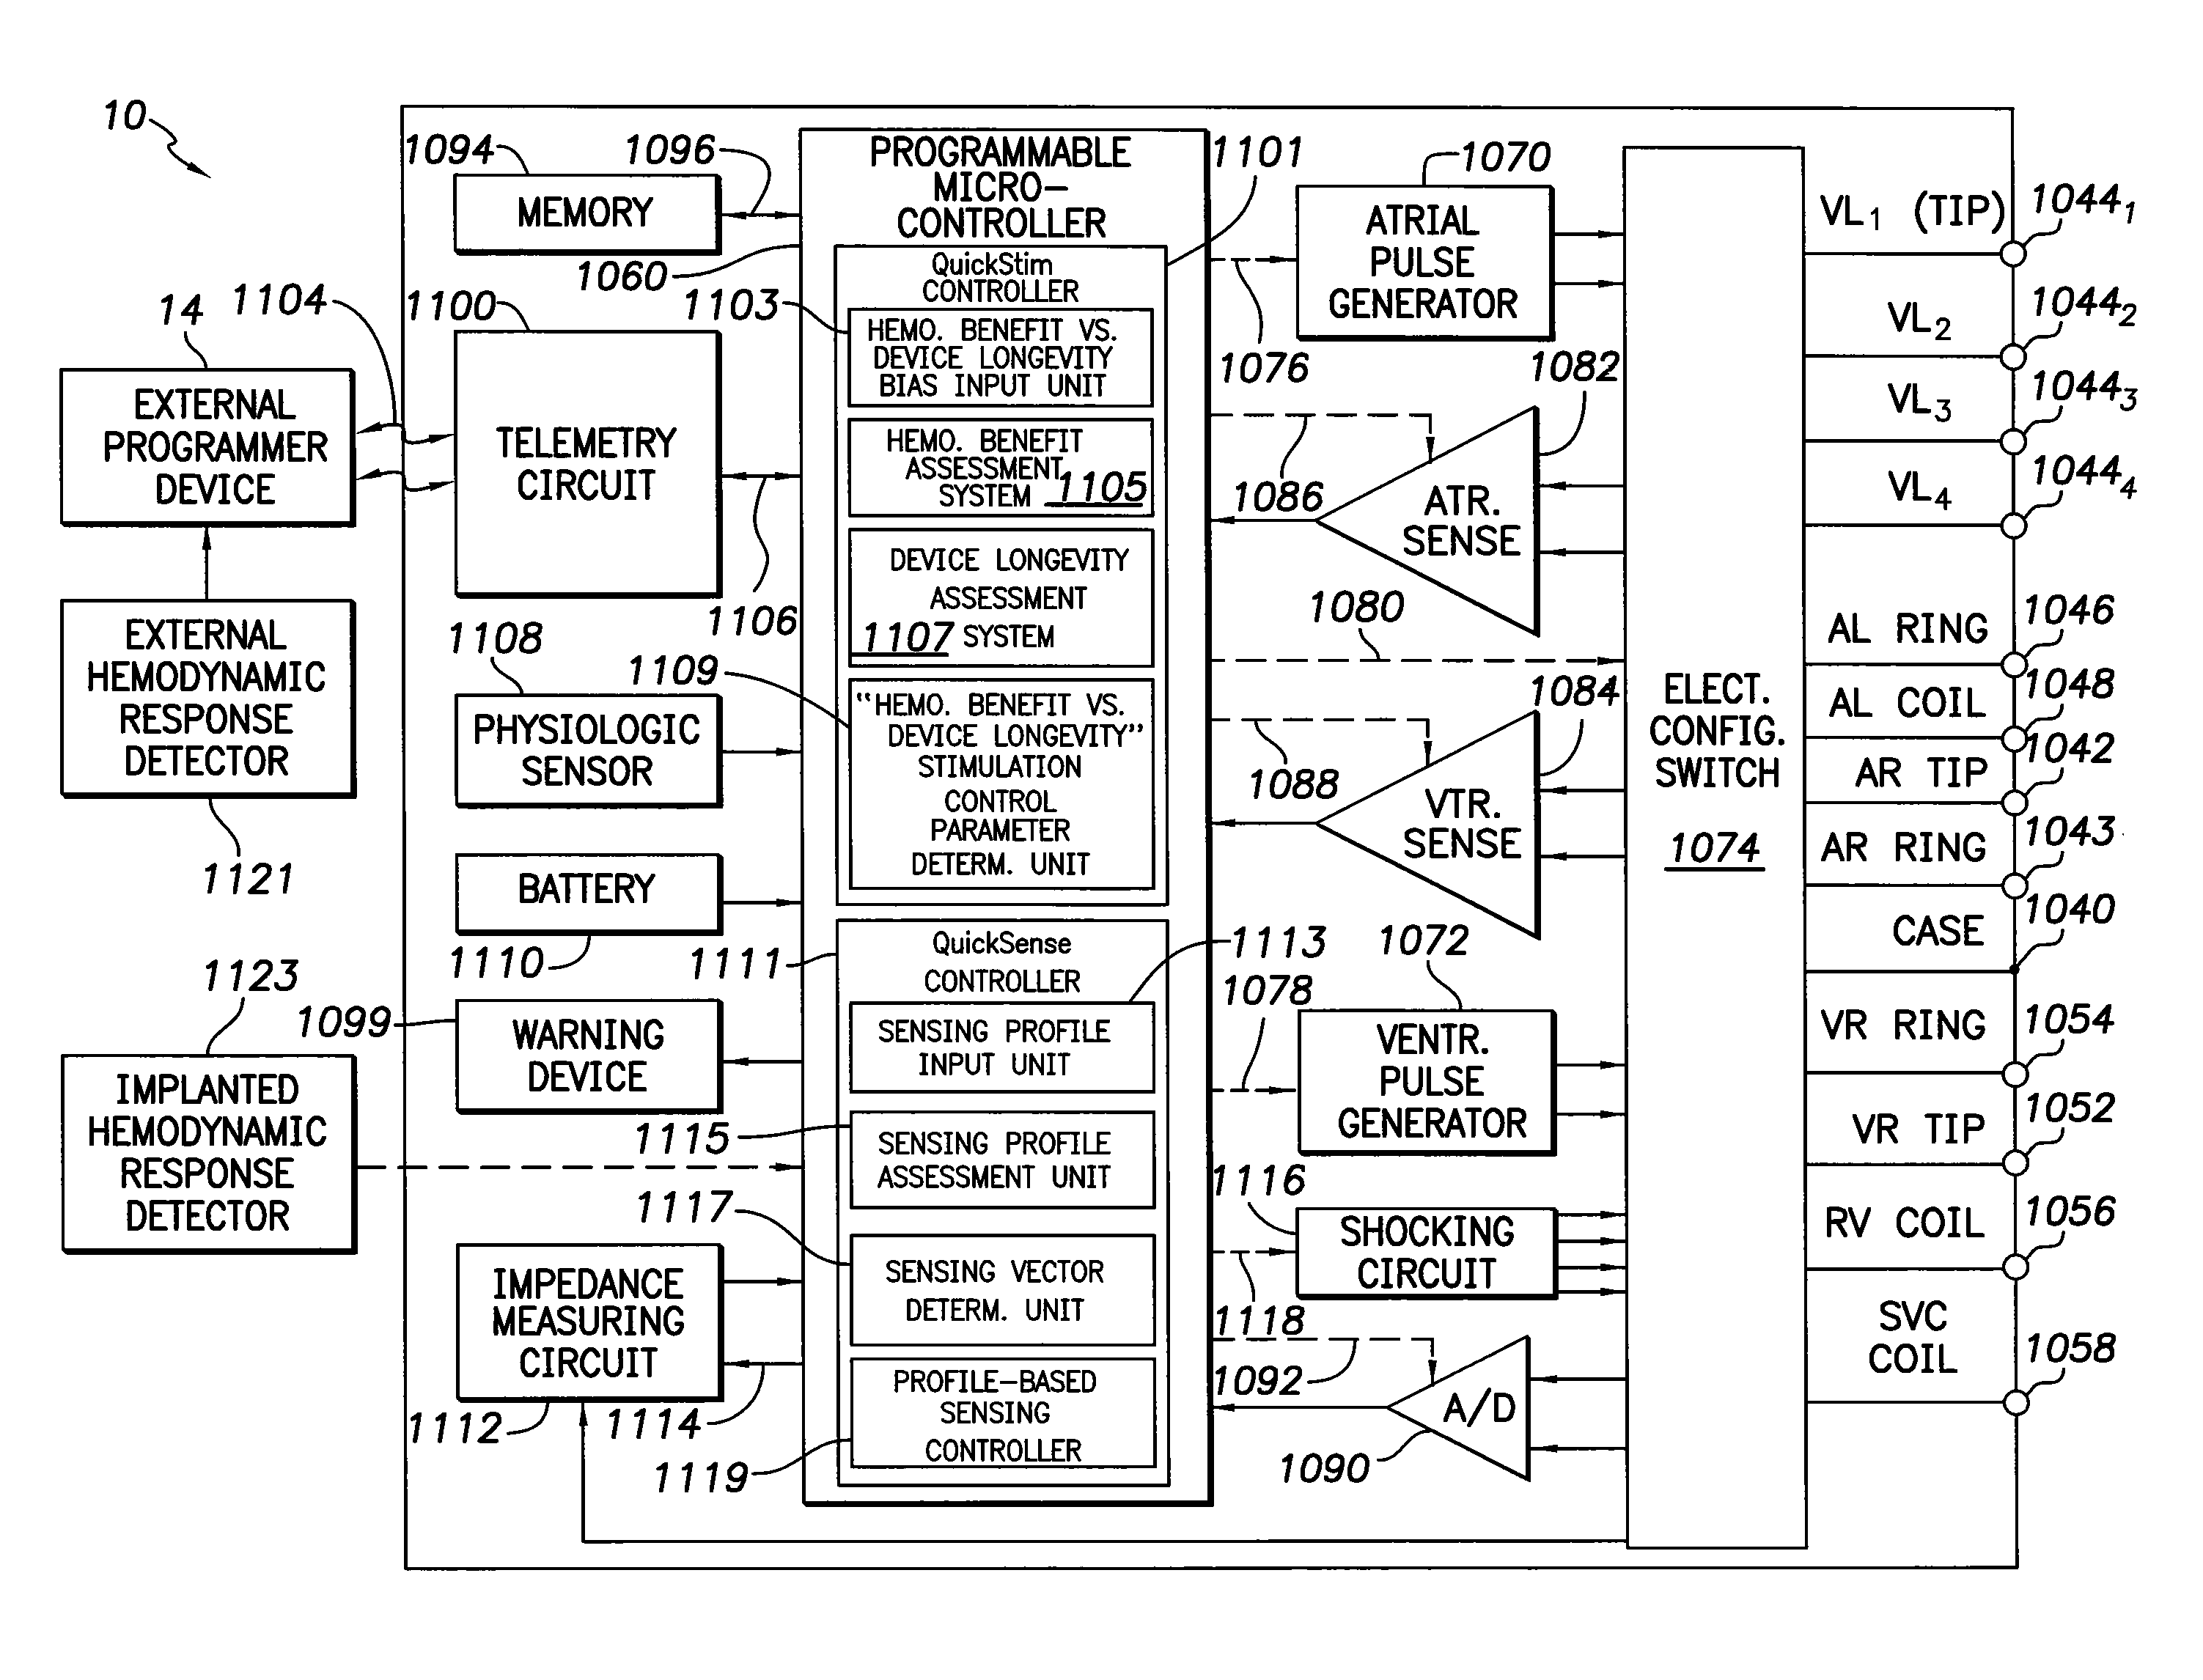 Systems and methods for optimizing multi-site cardiac pacing and sensing configurations for use with an implantable medical device